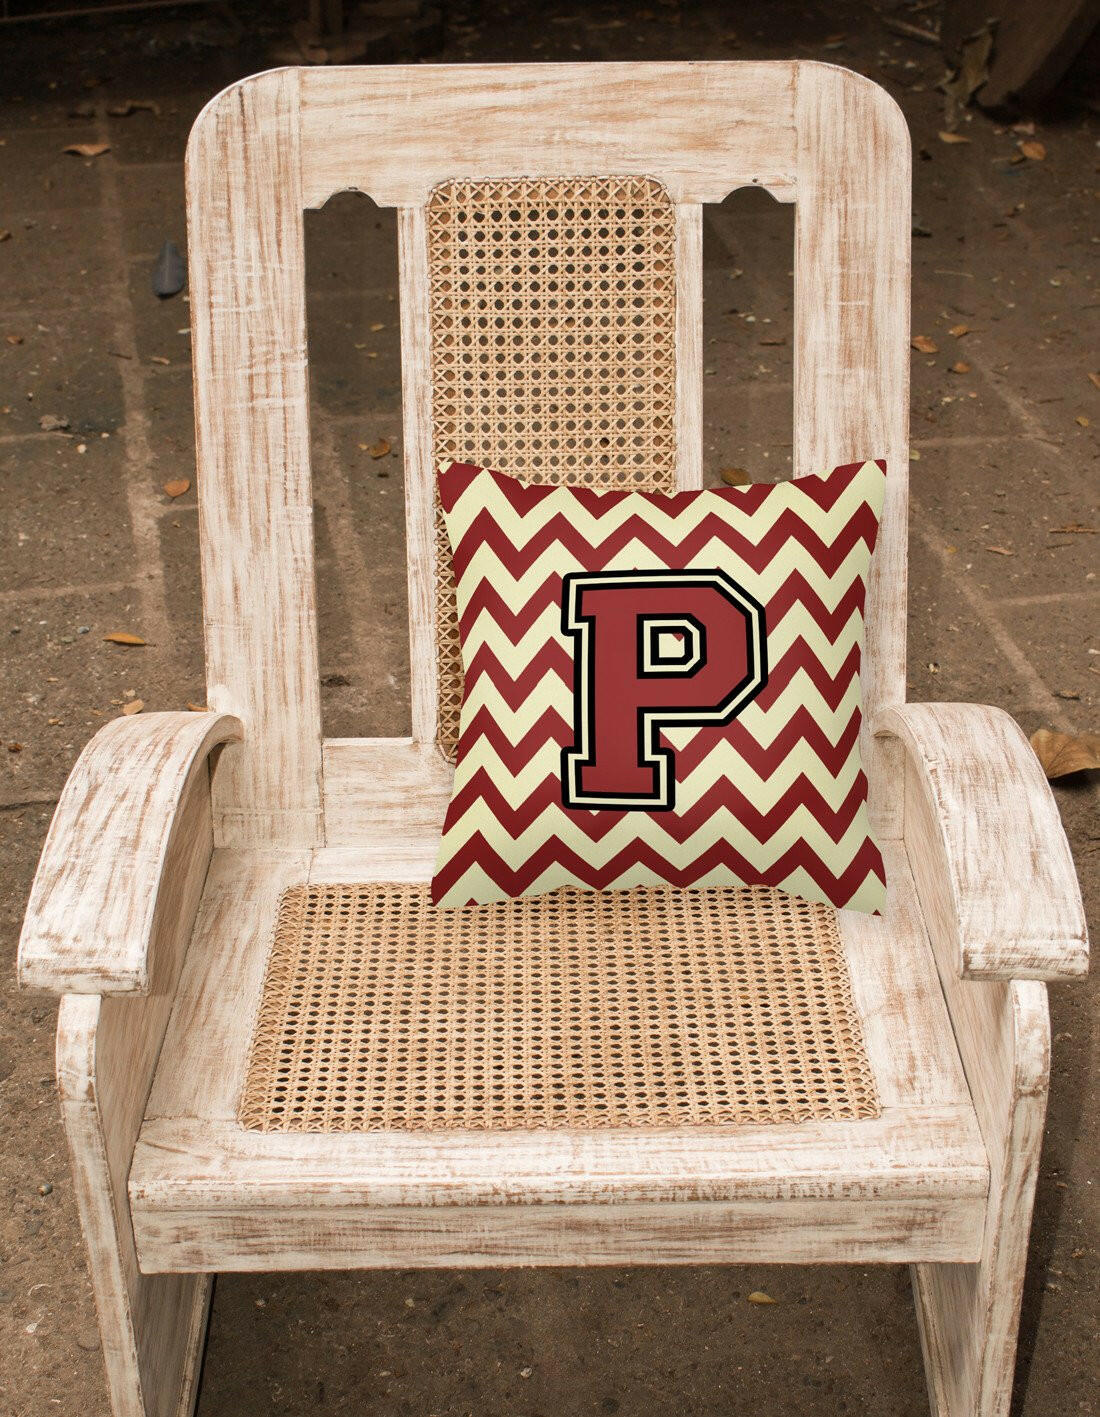 Letter P Chevron Maroon and Gold Fabric Decorative Pillow CJ1061-PPW1414 by Caroline's Treasures